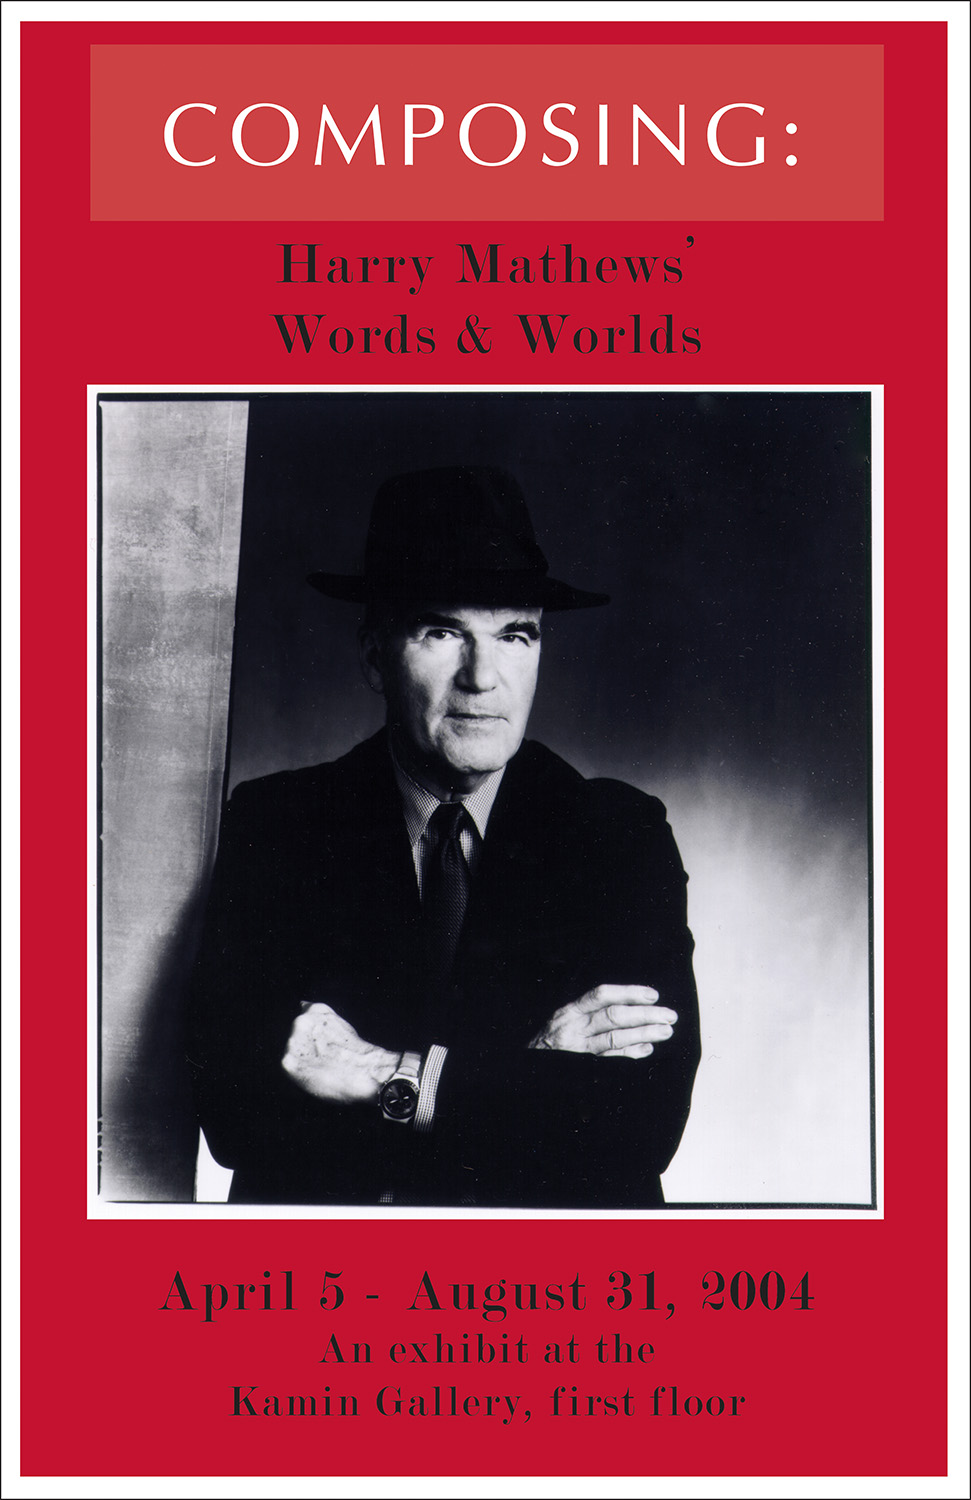 Composing: Harry Mathews' Words and Worlds